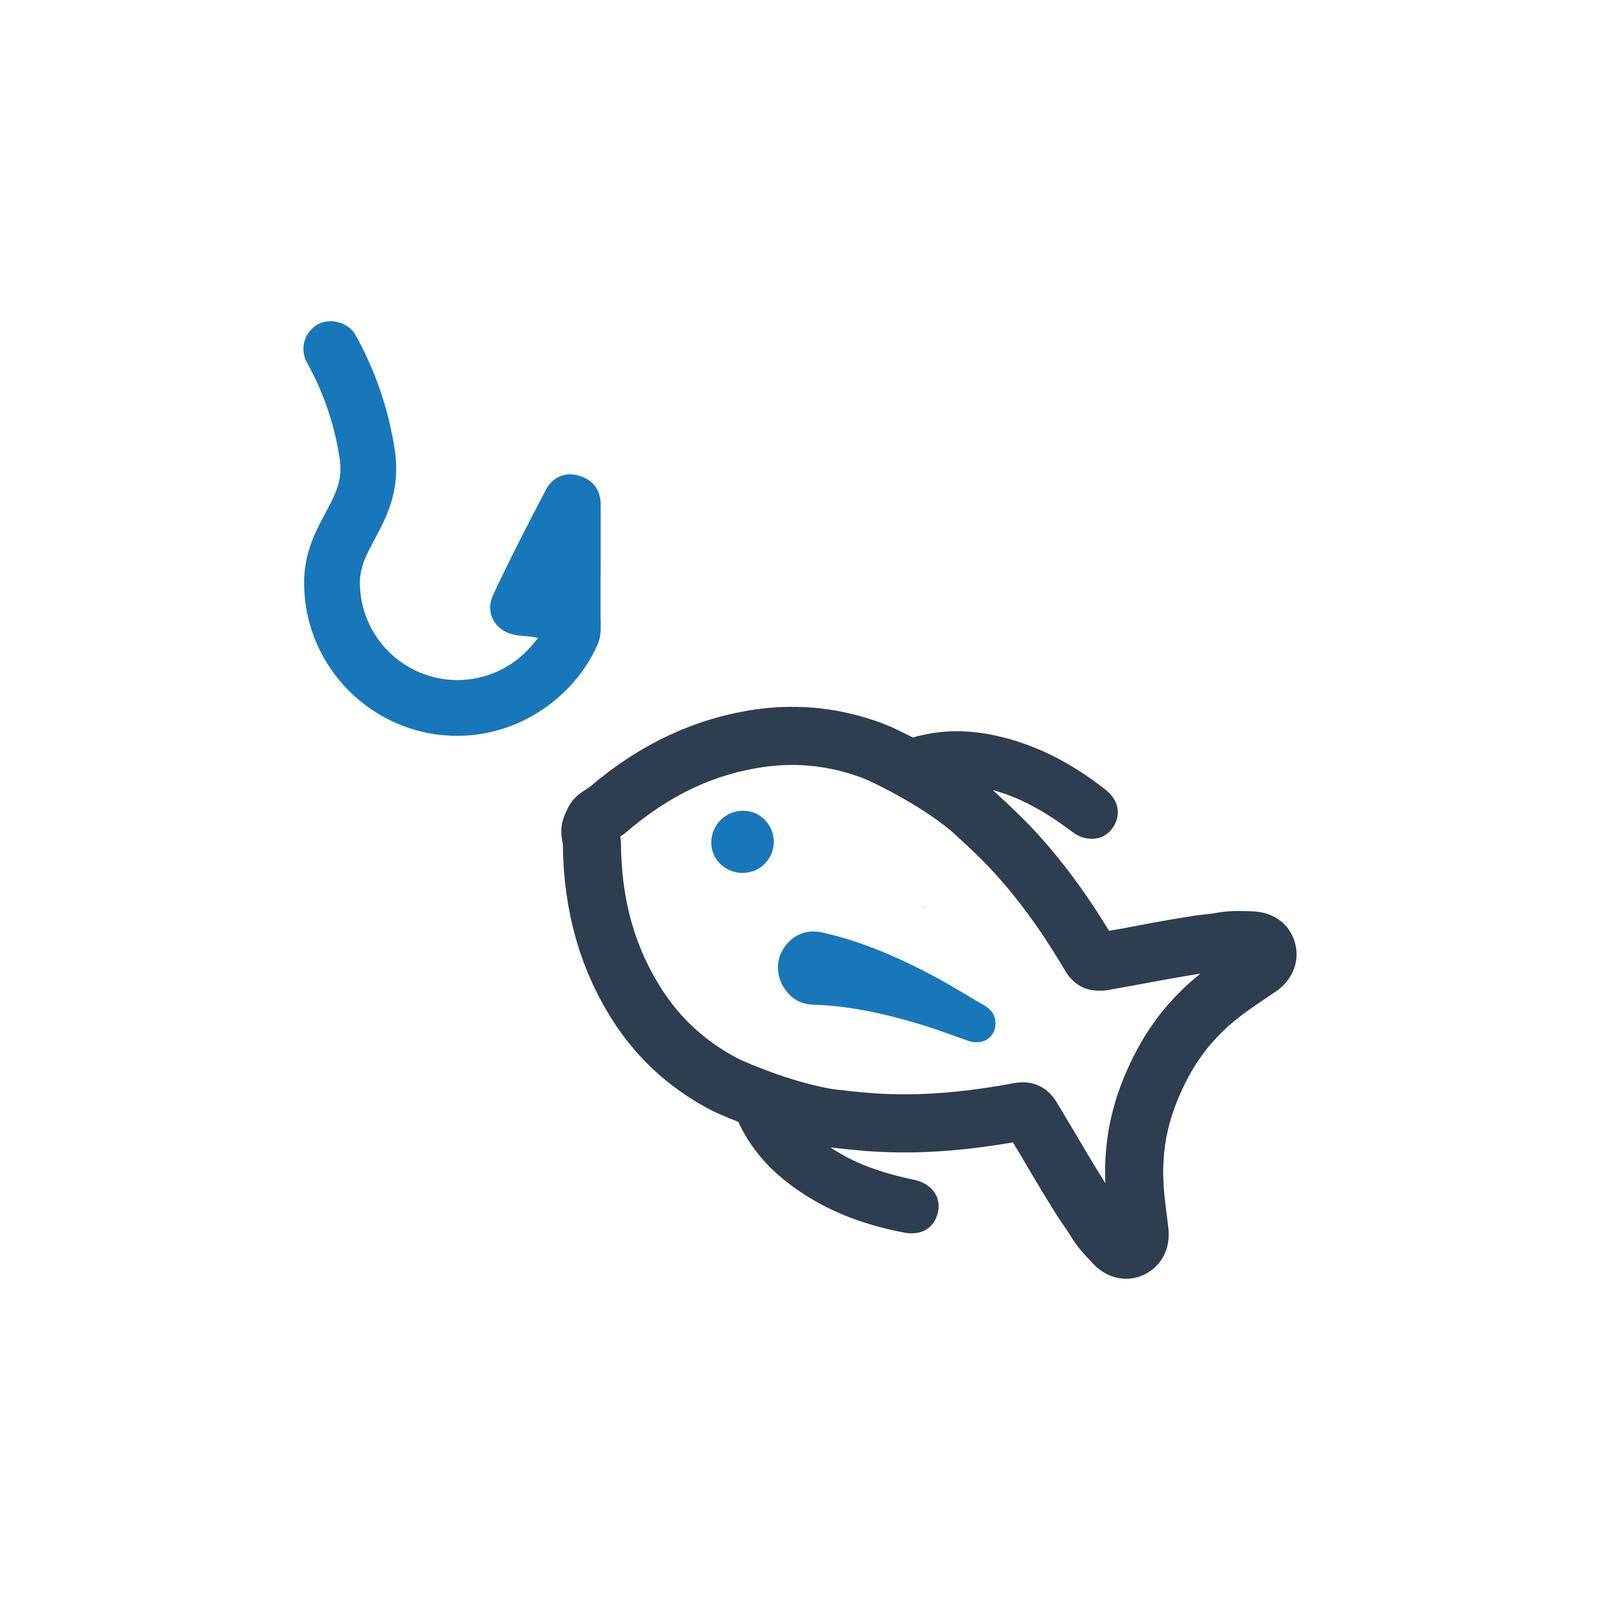 Fish Catching icon. Vector EPS file.